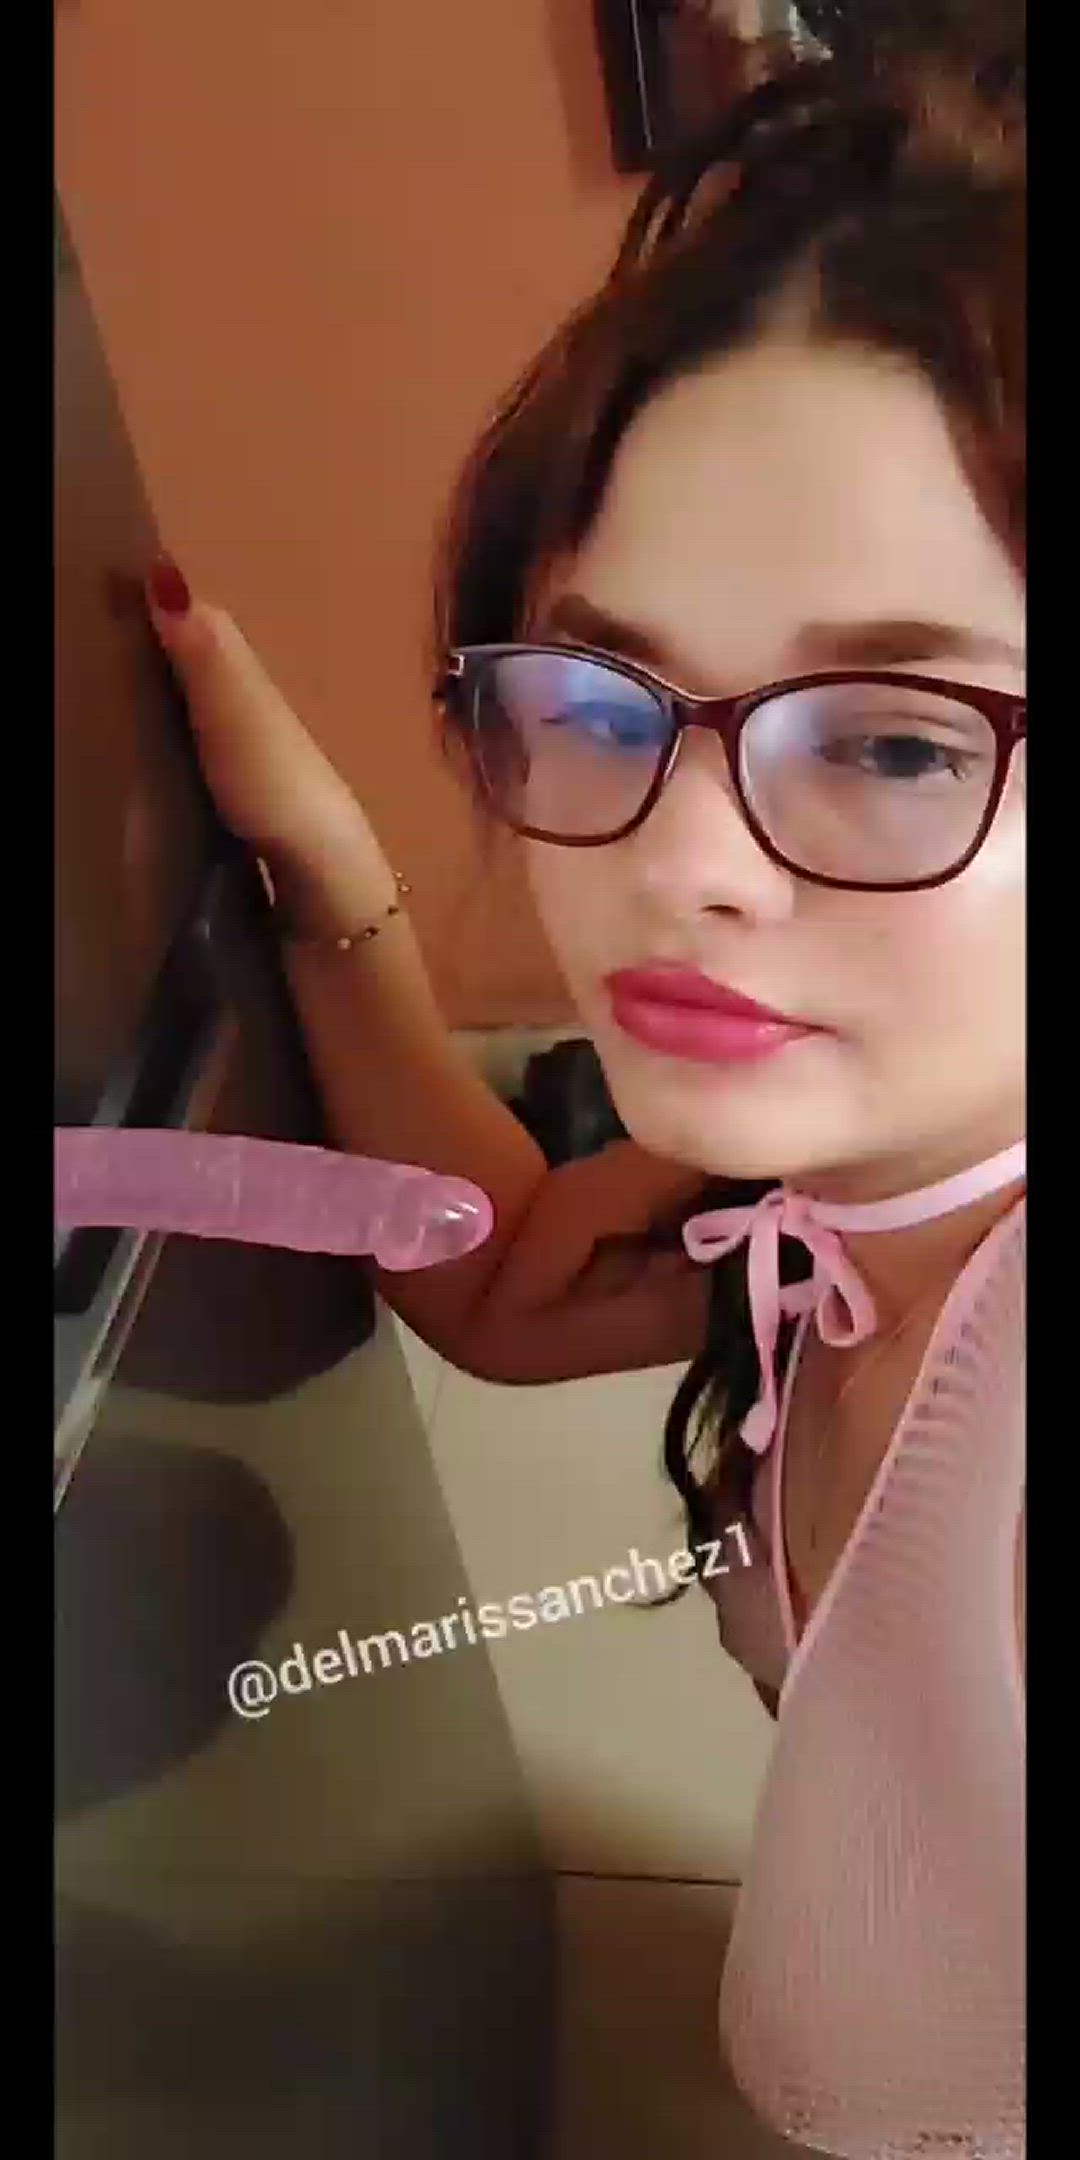 Amateur porn video with onlyfans model didibella1 <strong>@delmarissanchez</strong>